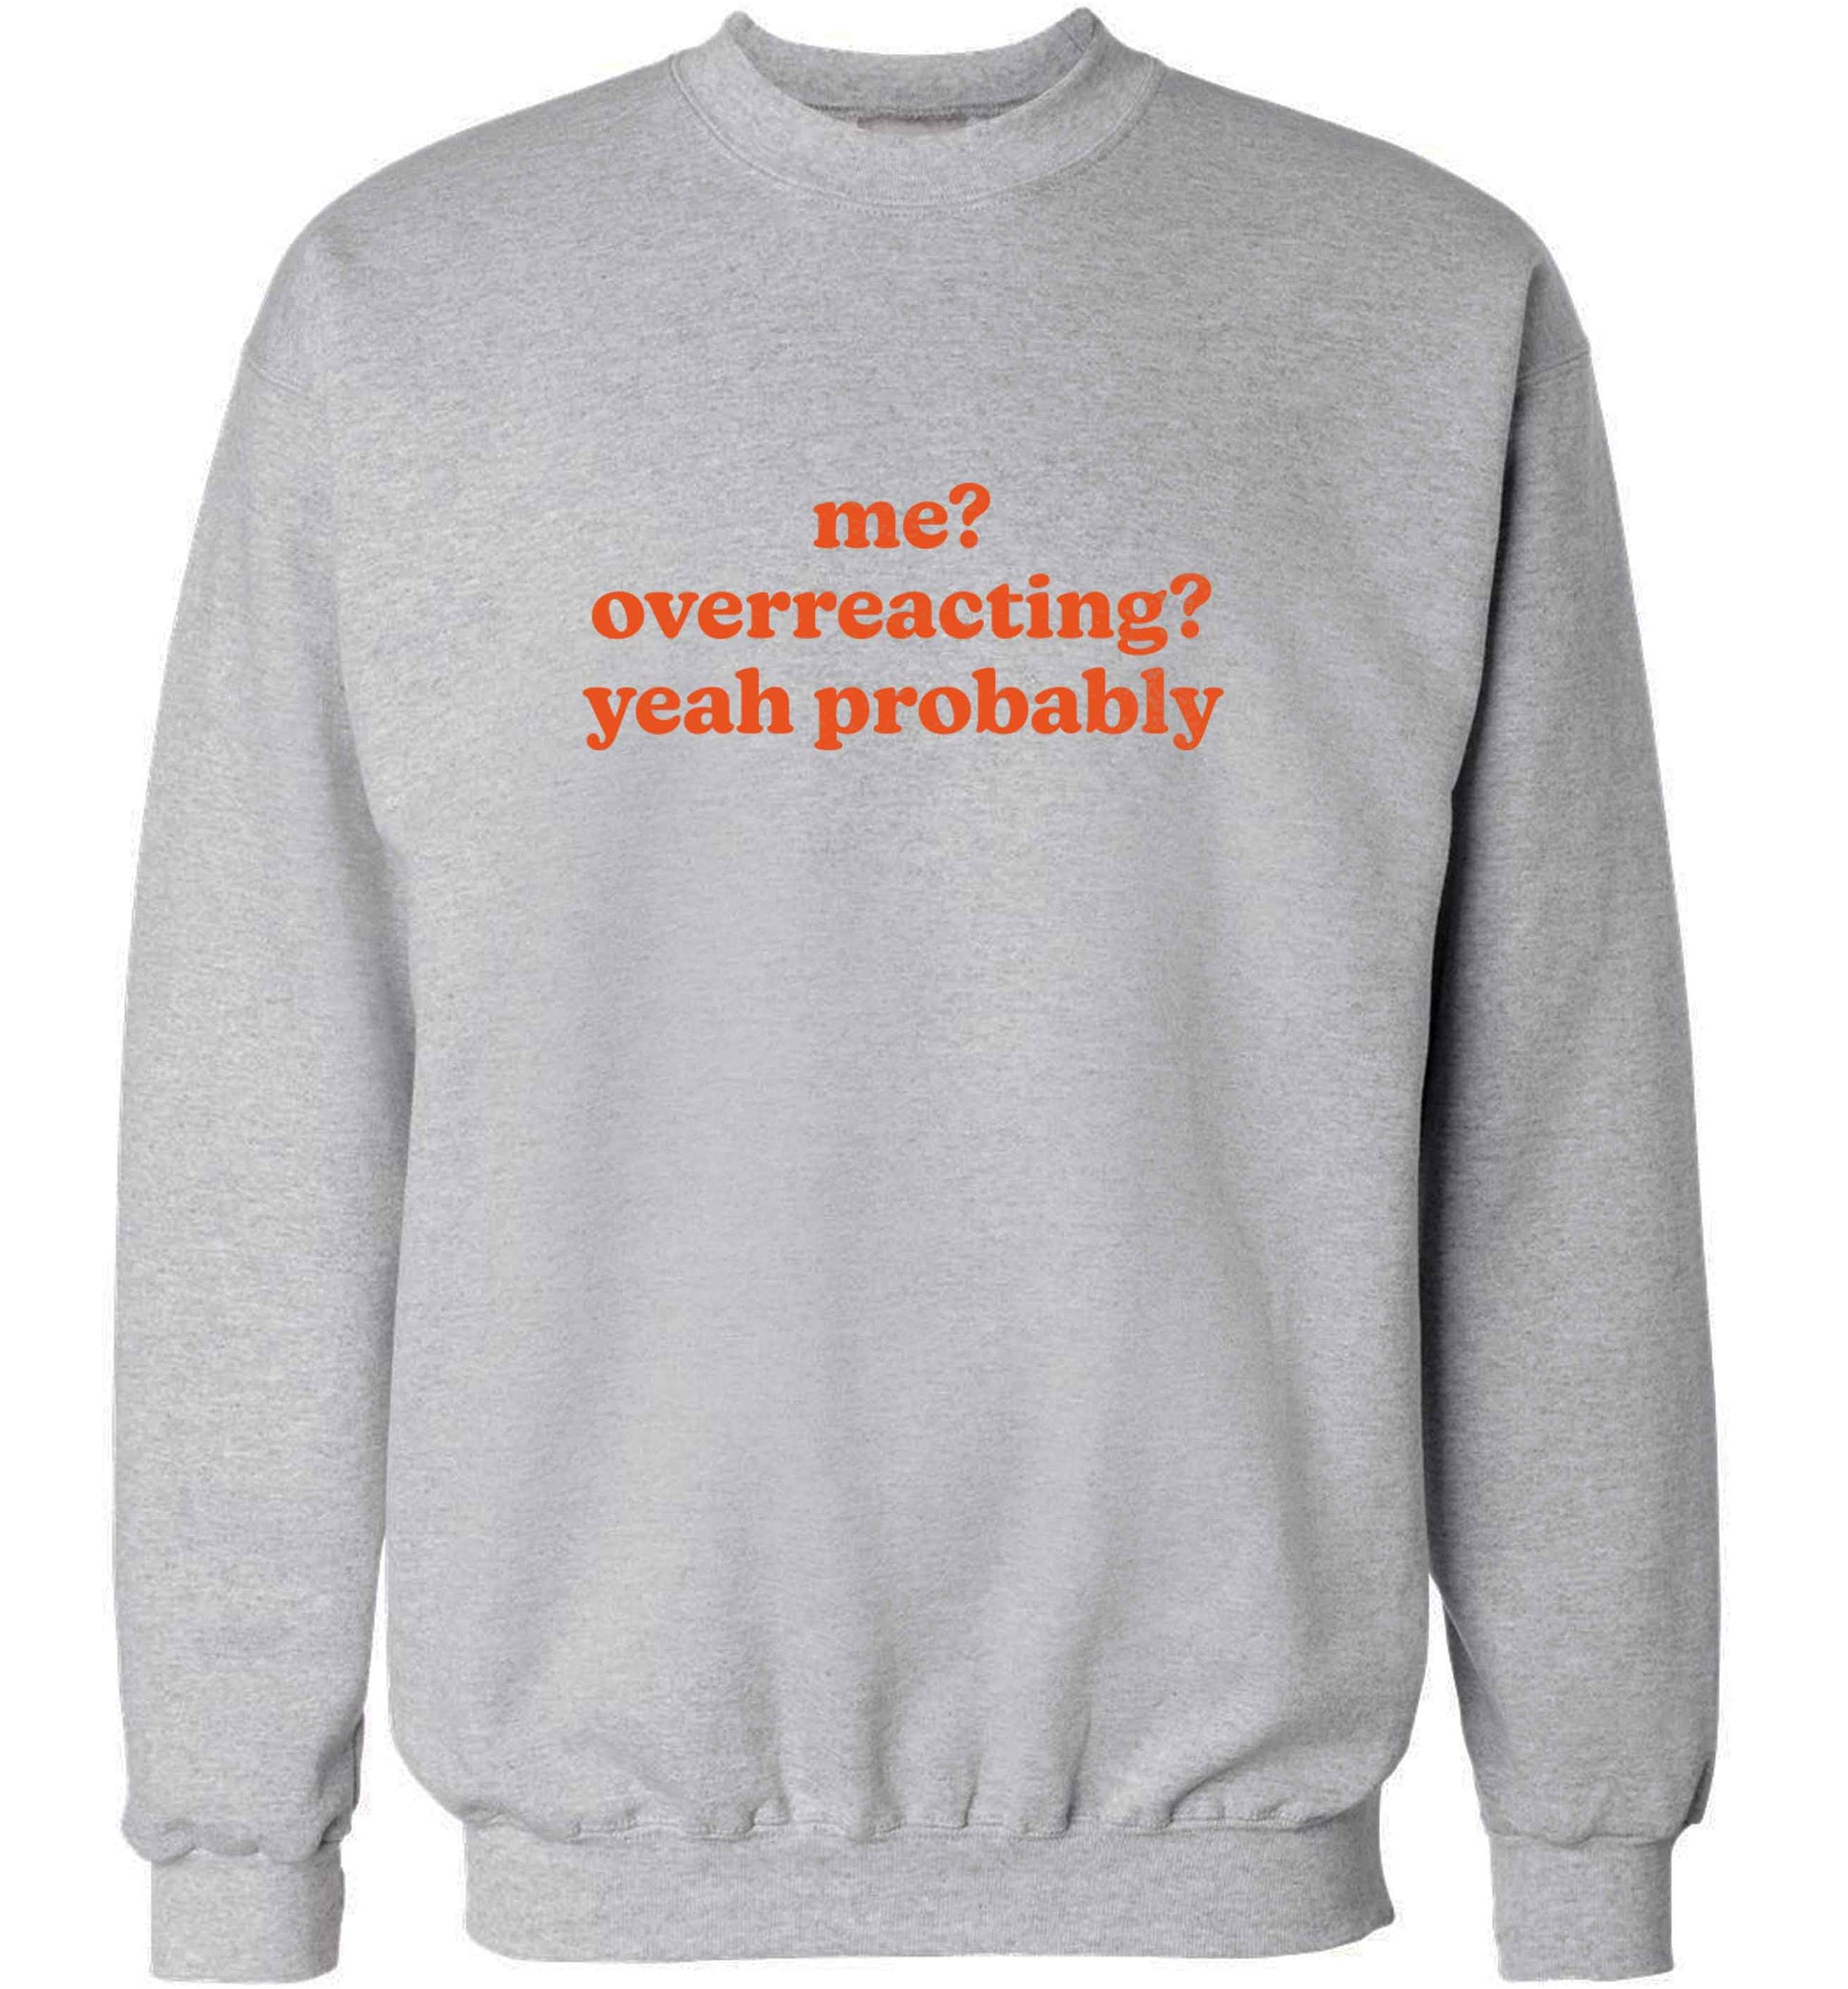 Me? Overreacting? Yeah probably adult's unisex grey sweater 2XL